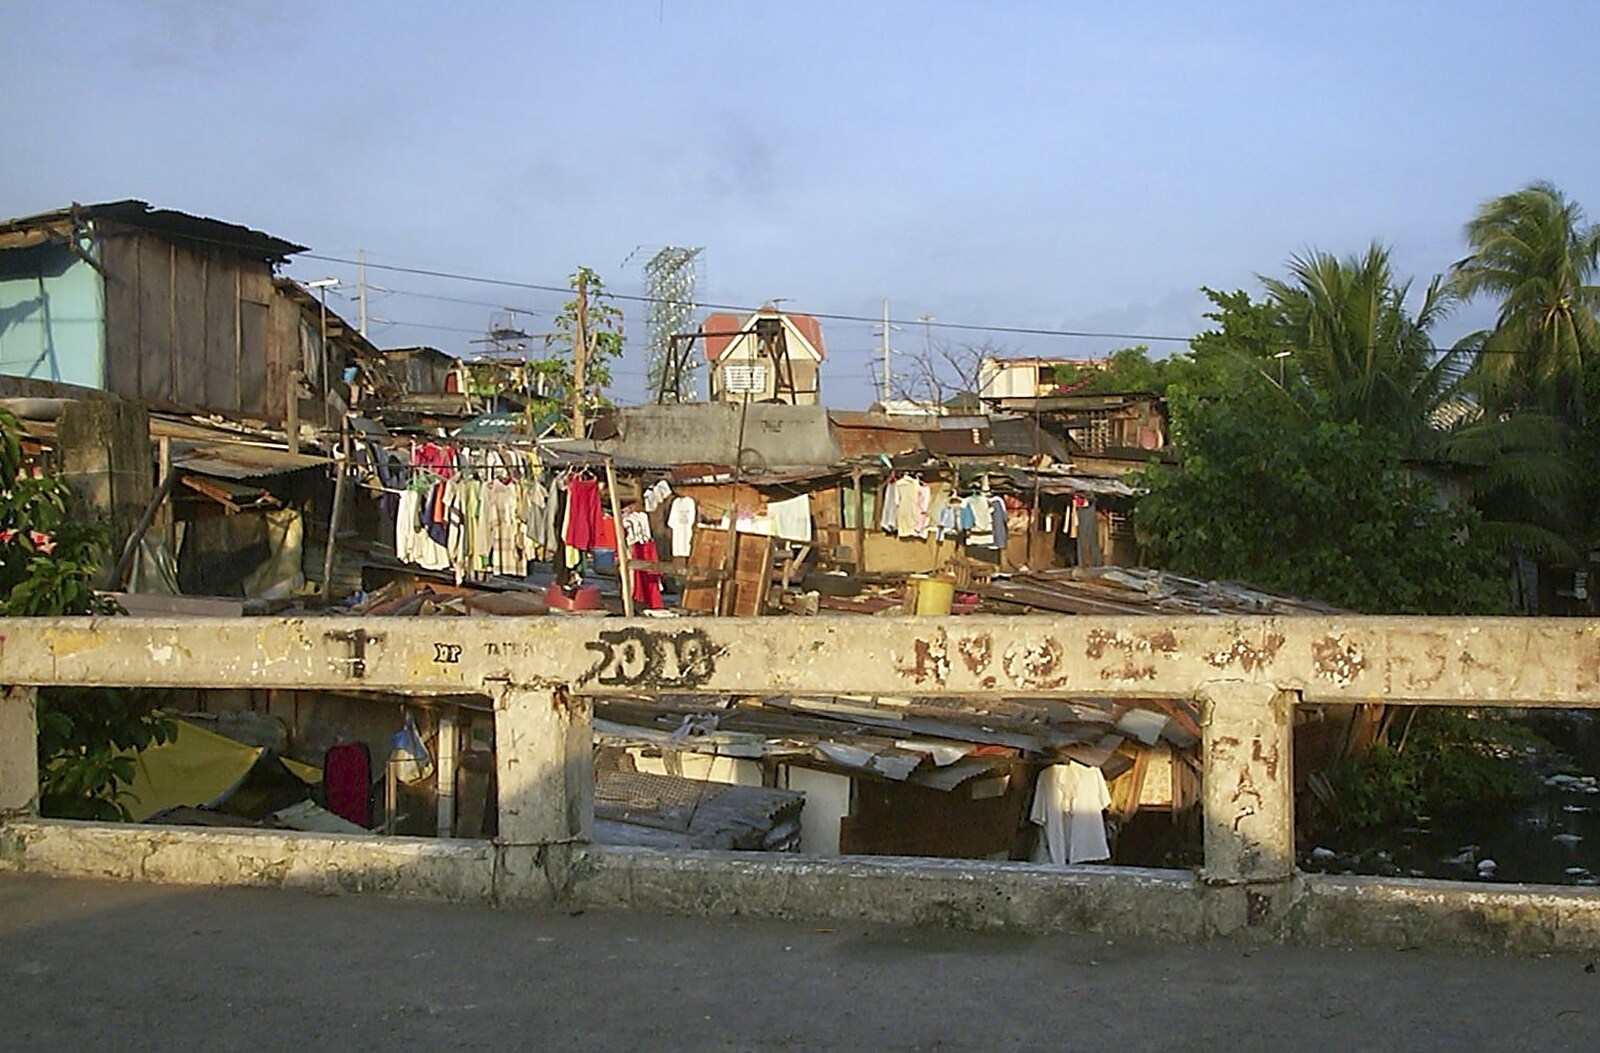 One of many shanty towns on the edge of the city from A Postcard From Manila: a Working Trip, Philippines - 9th July 2004